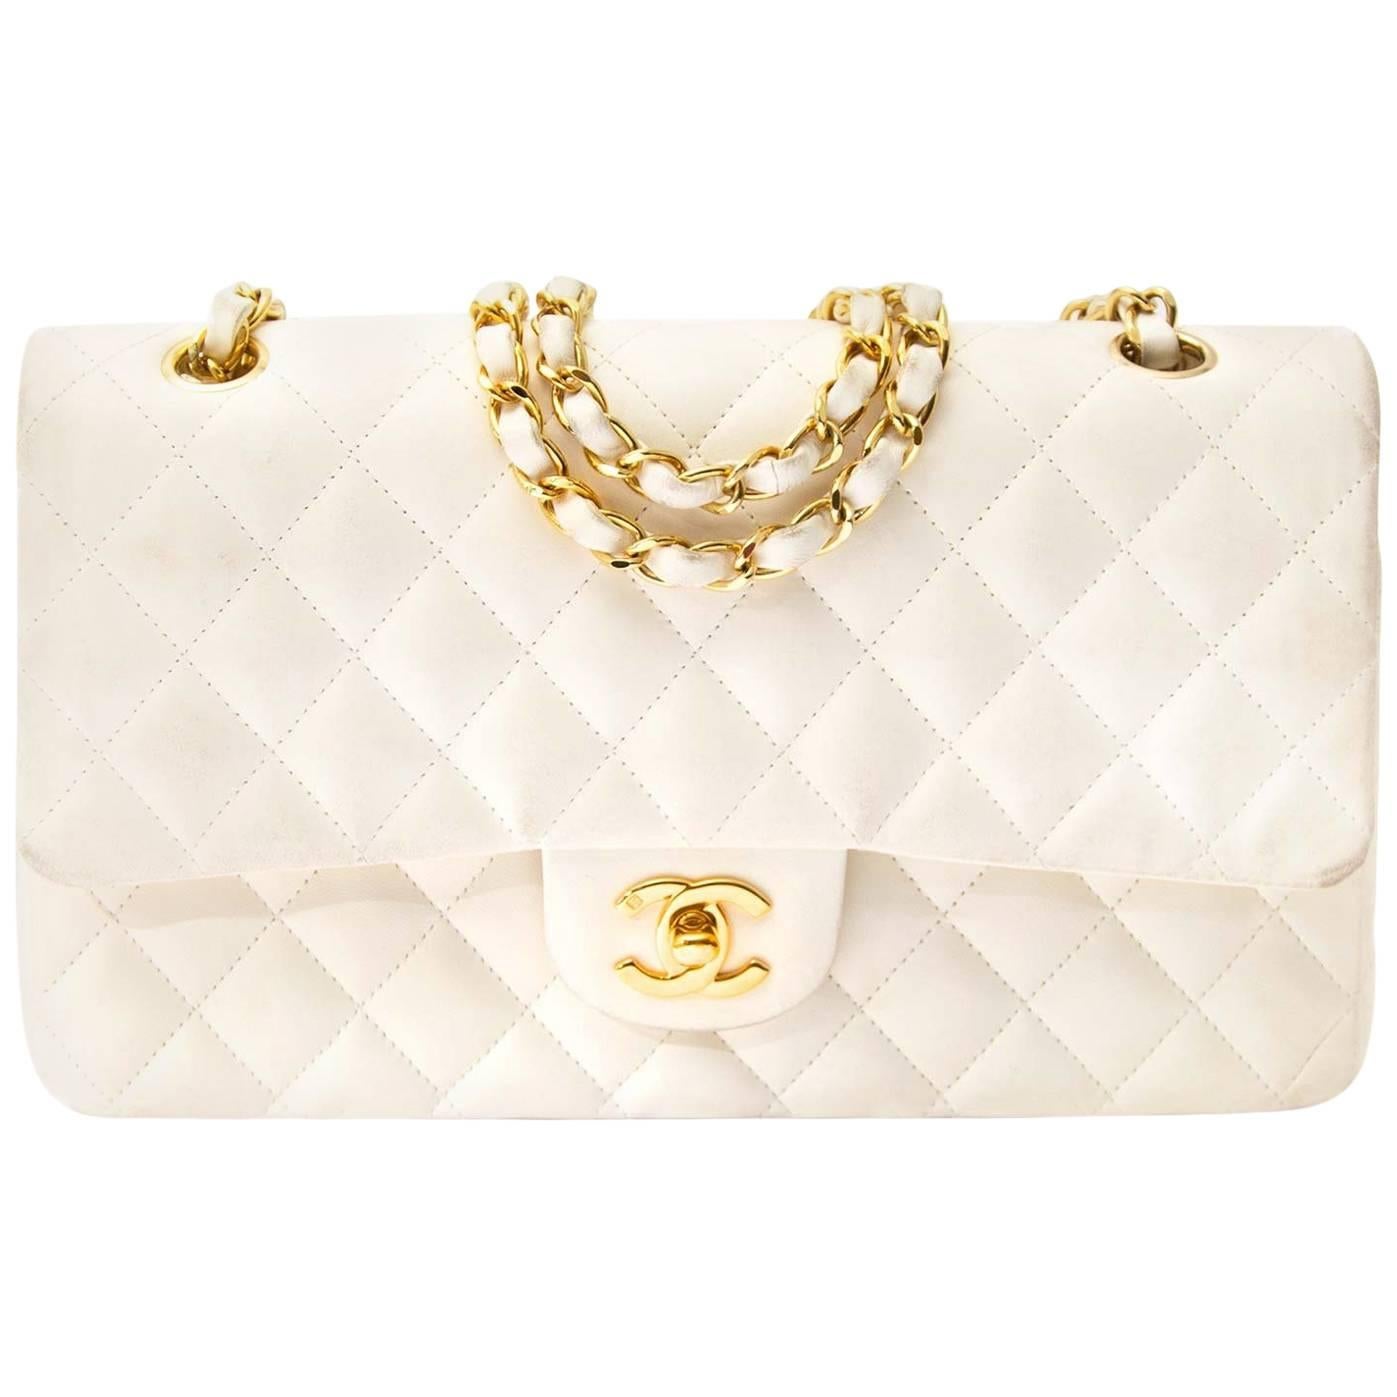 white chanel bags for sale